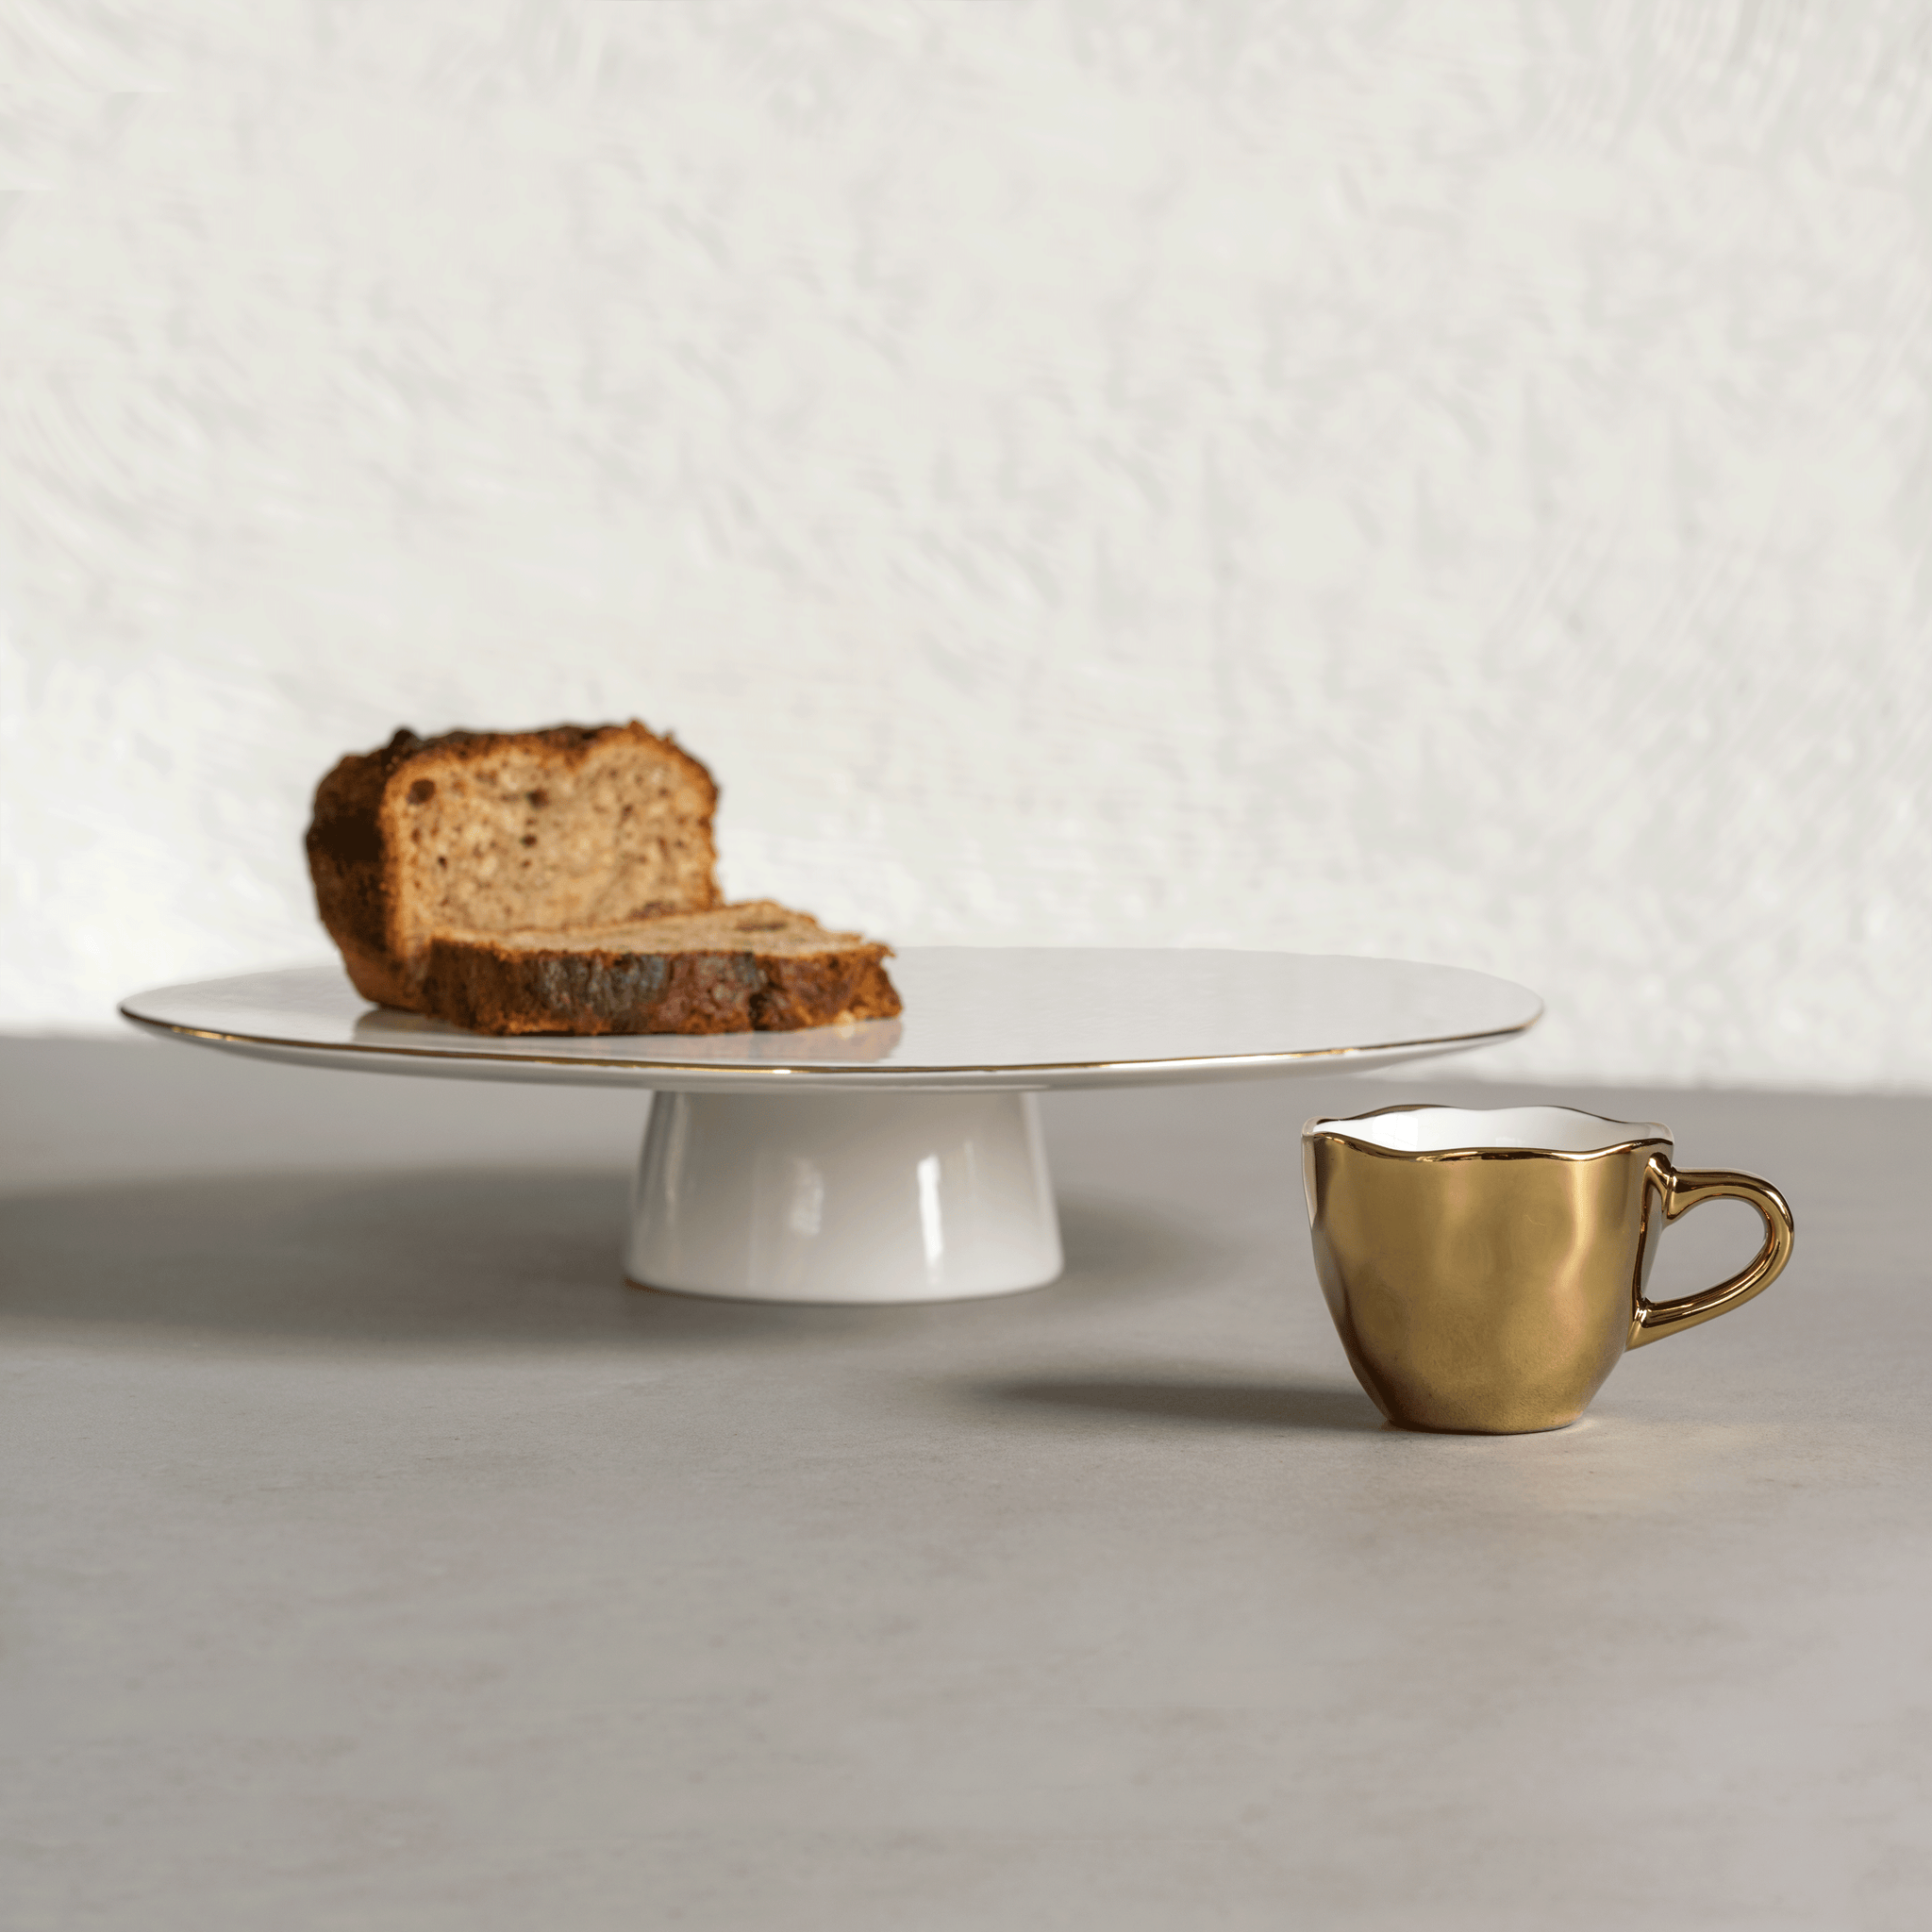 URBAN NATURE CULTURE UNC GOOD MORNING CAKE STAND